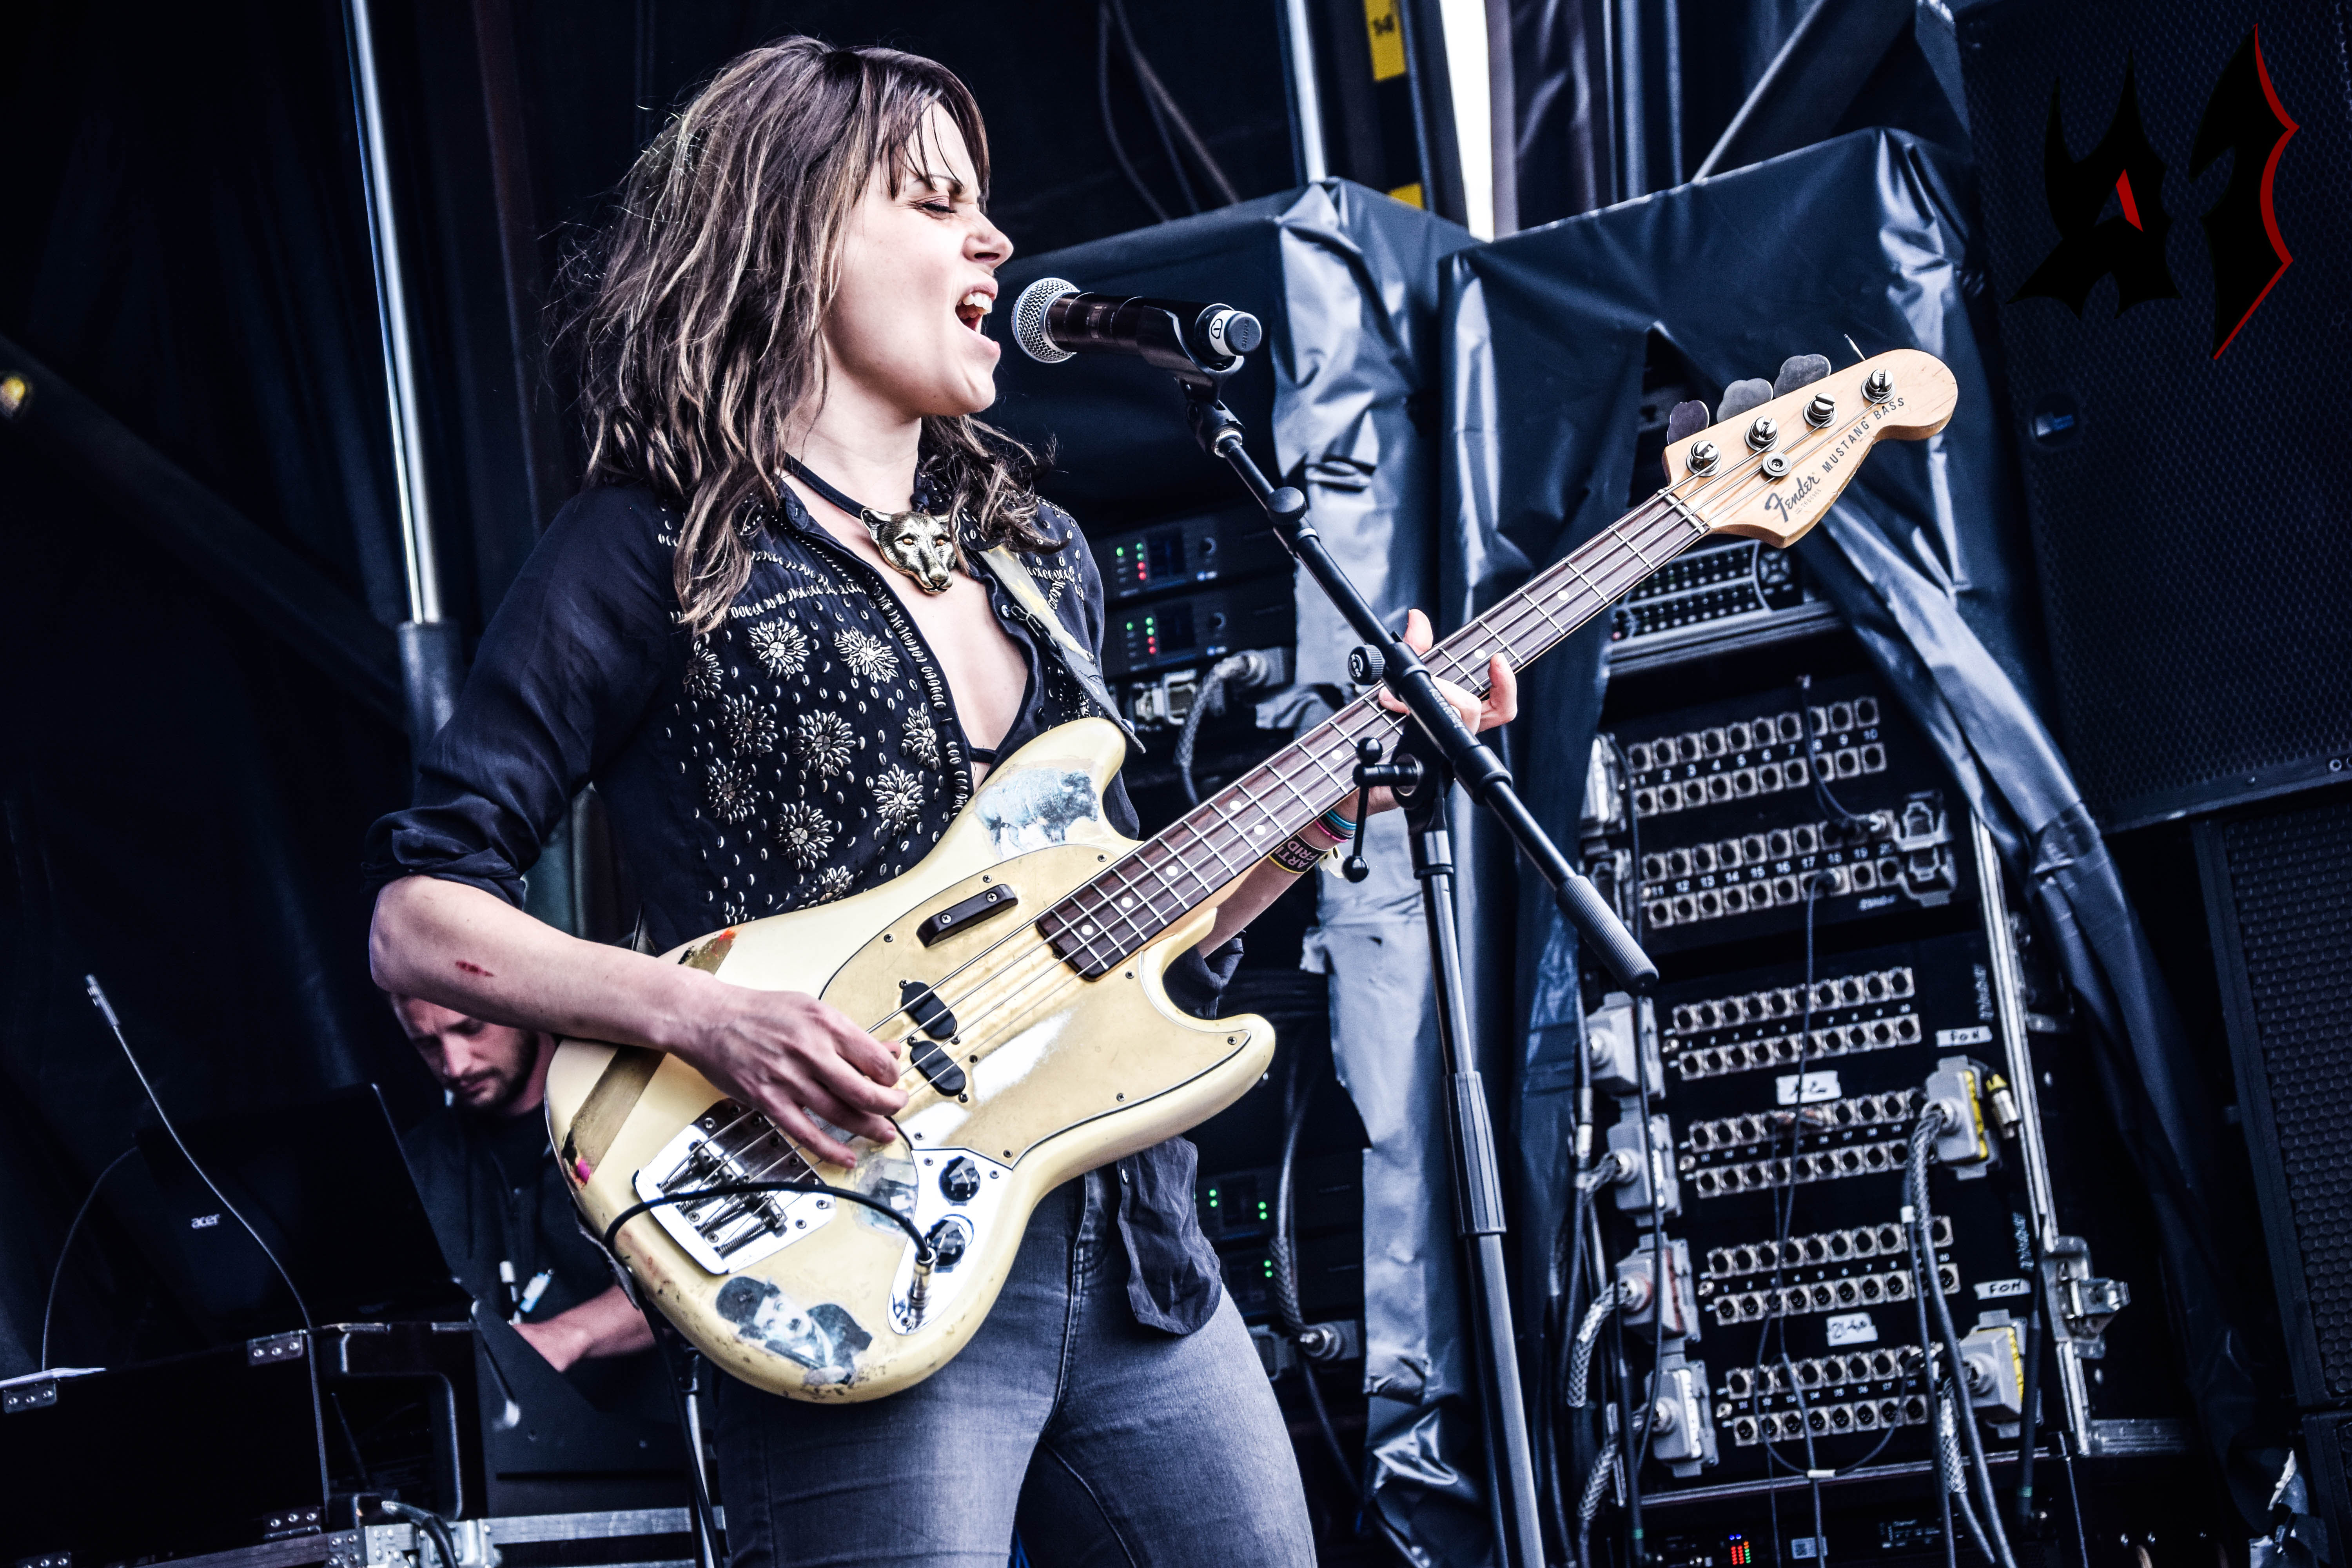 Donwload 2018 – Day 3 - The Last Internationale 16